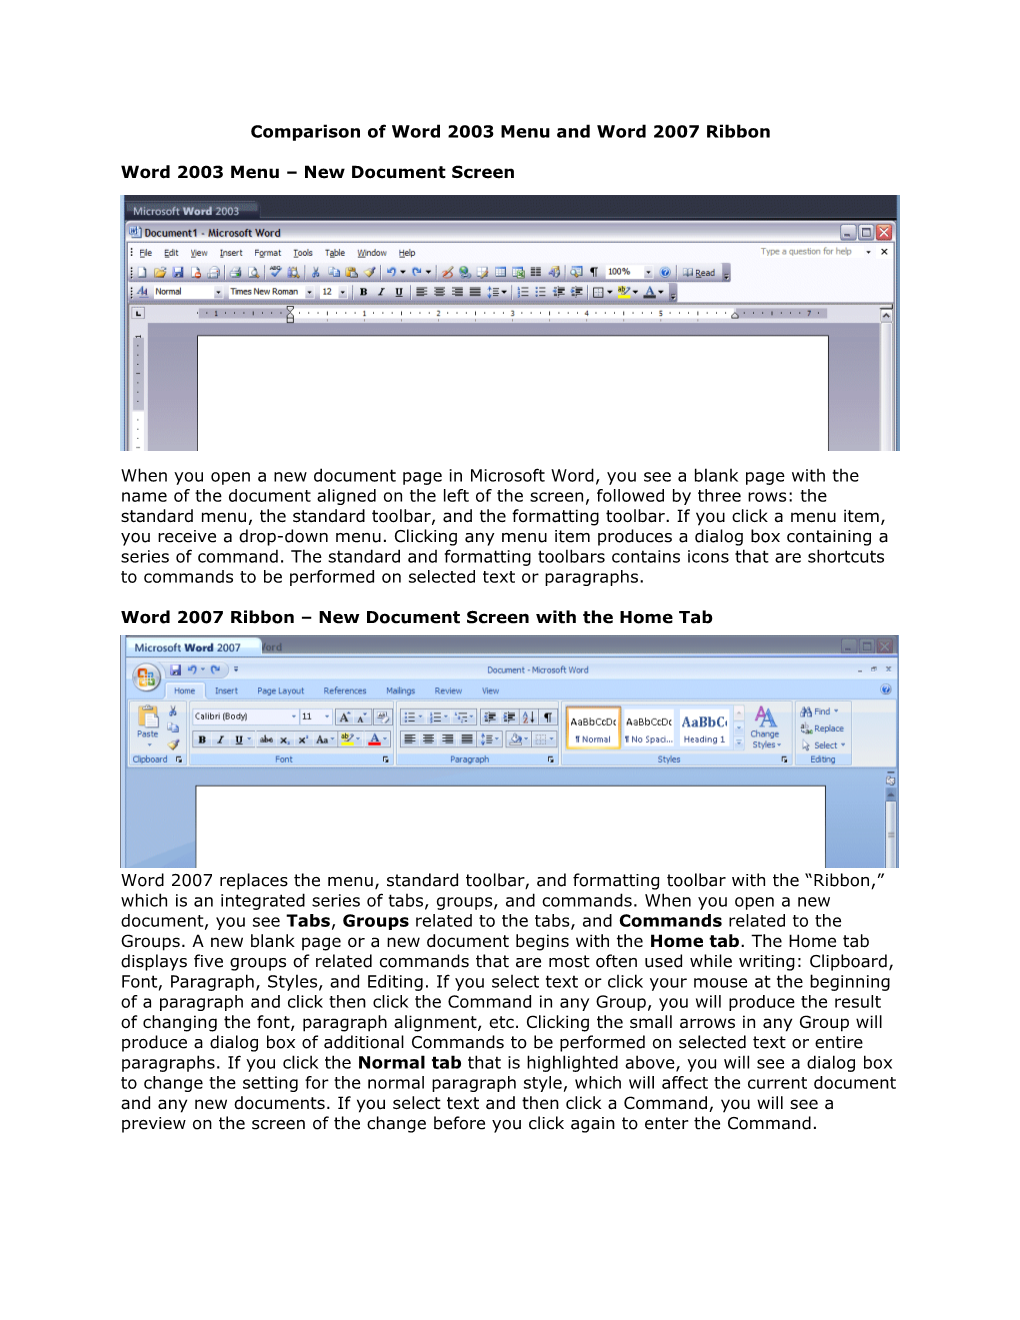 Comparison of Word 2003 Menu and Word 2007 Ribbon